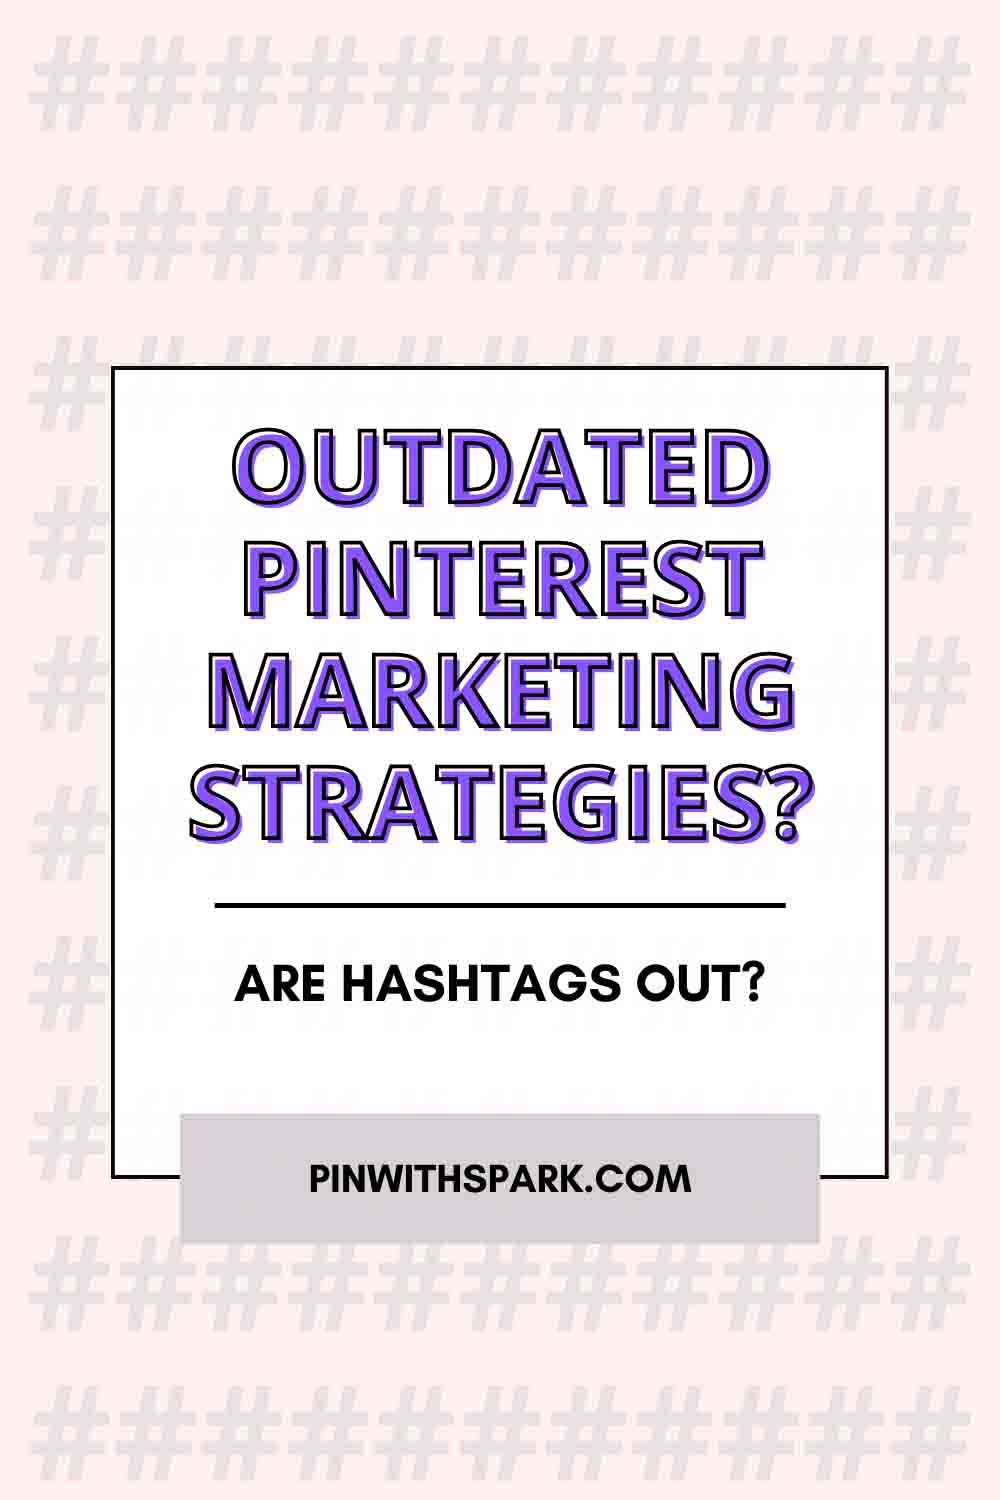 Outdated Pinterest Marketing Strategies text overlay